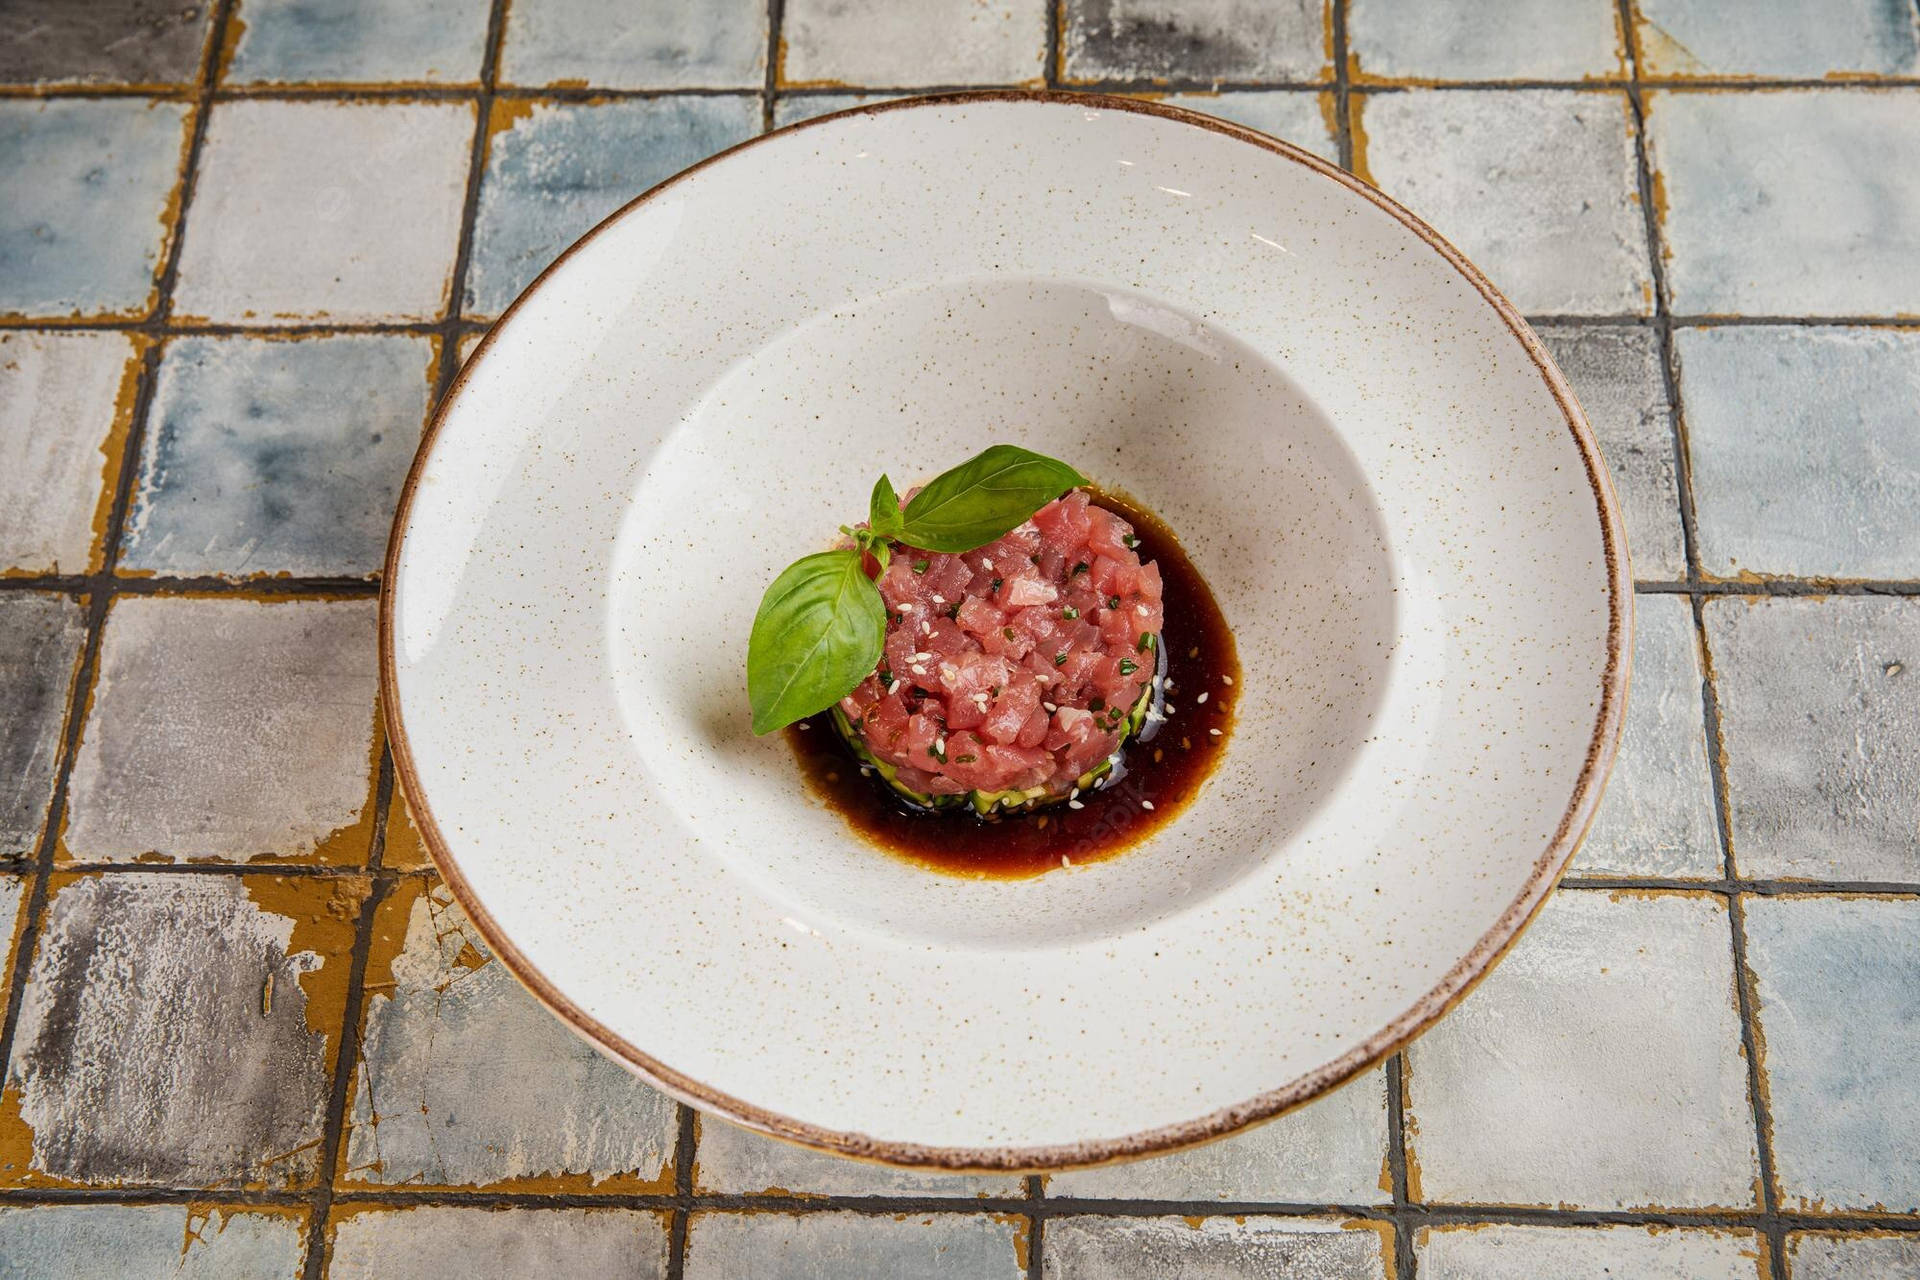 Caption: Exquisite Steak Tartare with Fresh Herbs and Savory Sauce Wallpaper